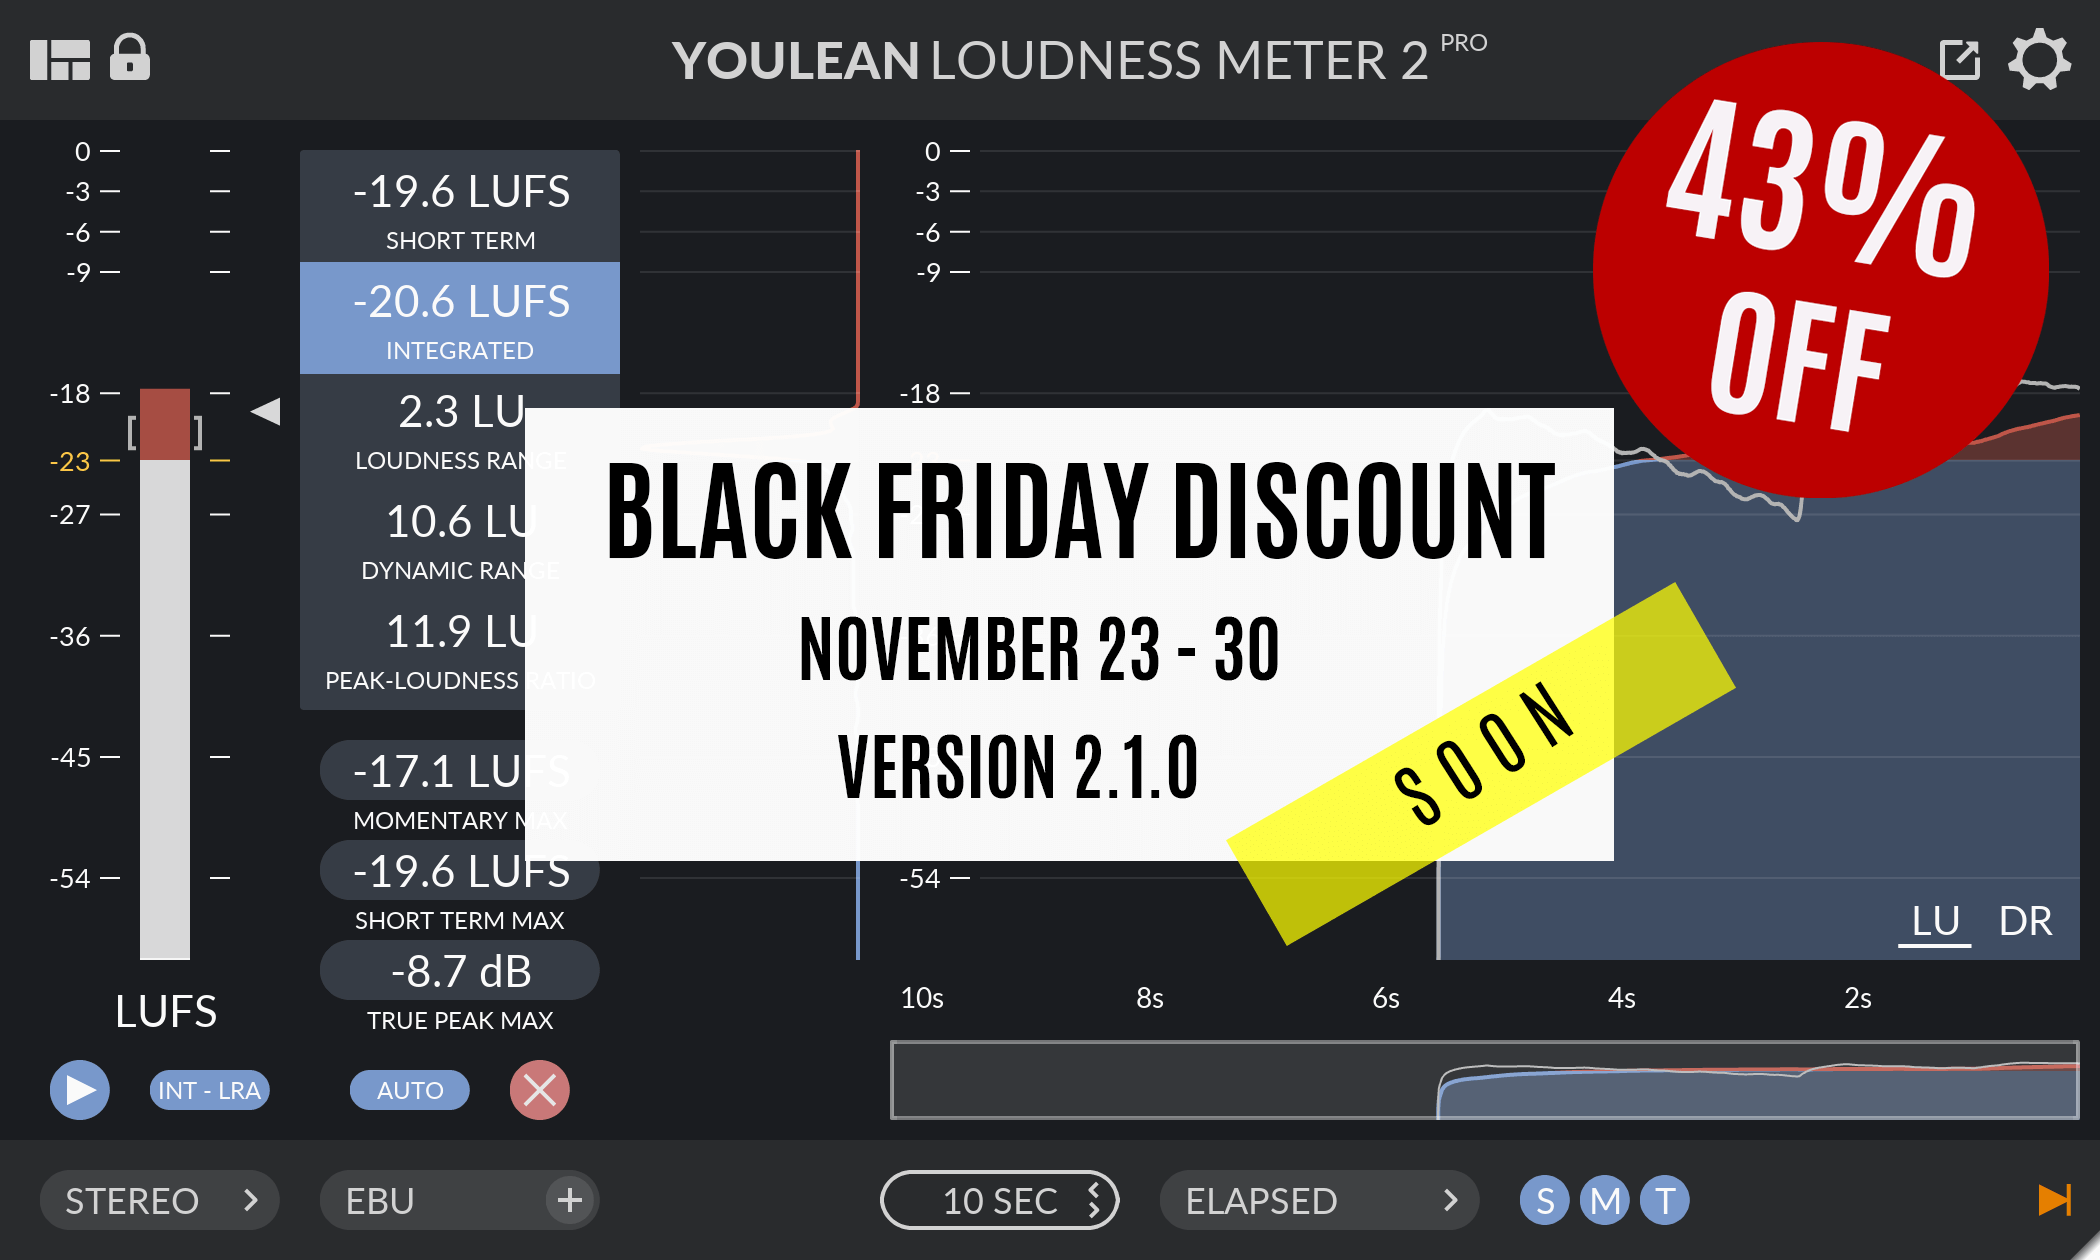 grote Oceaan tijger mixer Youlean Loudness Meter on sale for $27 USD this Black Friday